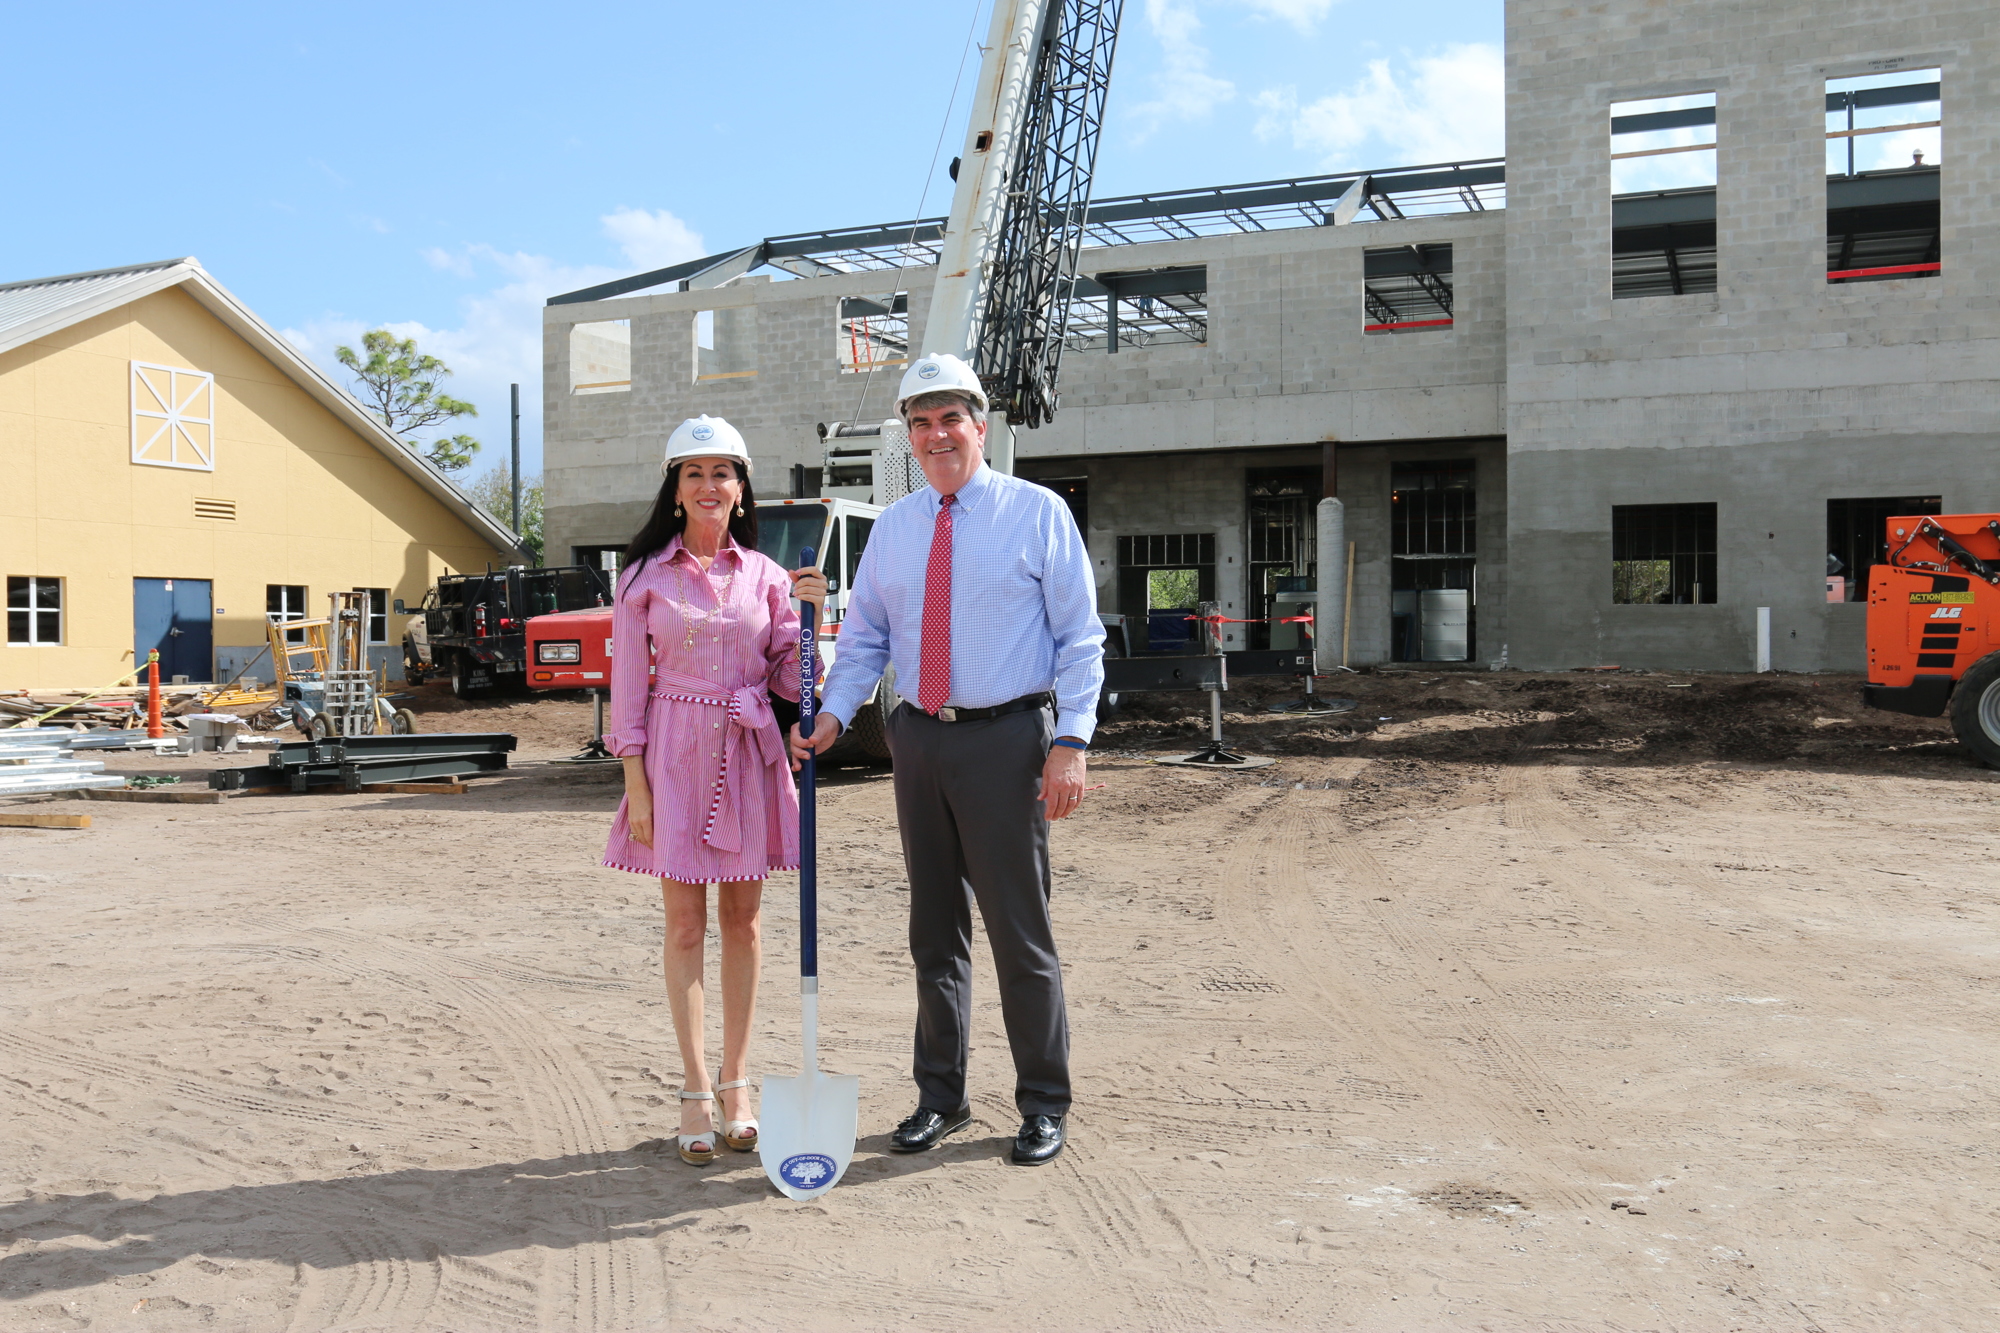 Ashley Kozel, Out-of-Door Academy's chair of the Board of Trustees, and David Mahler, head of school, look forward to providing a new building and programming for ODA's middle schoolers. Courtesy photo.